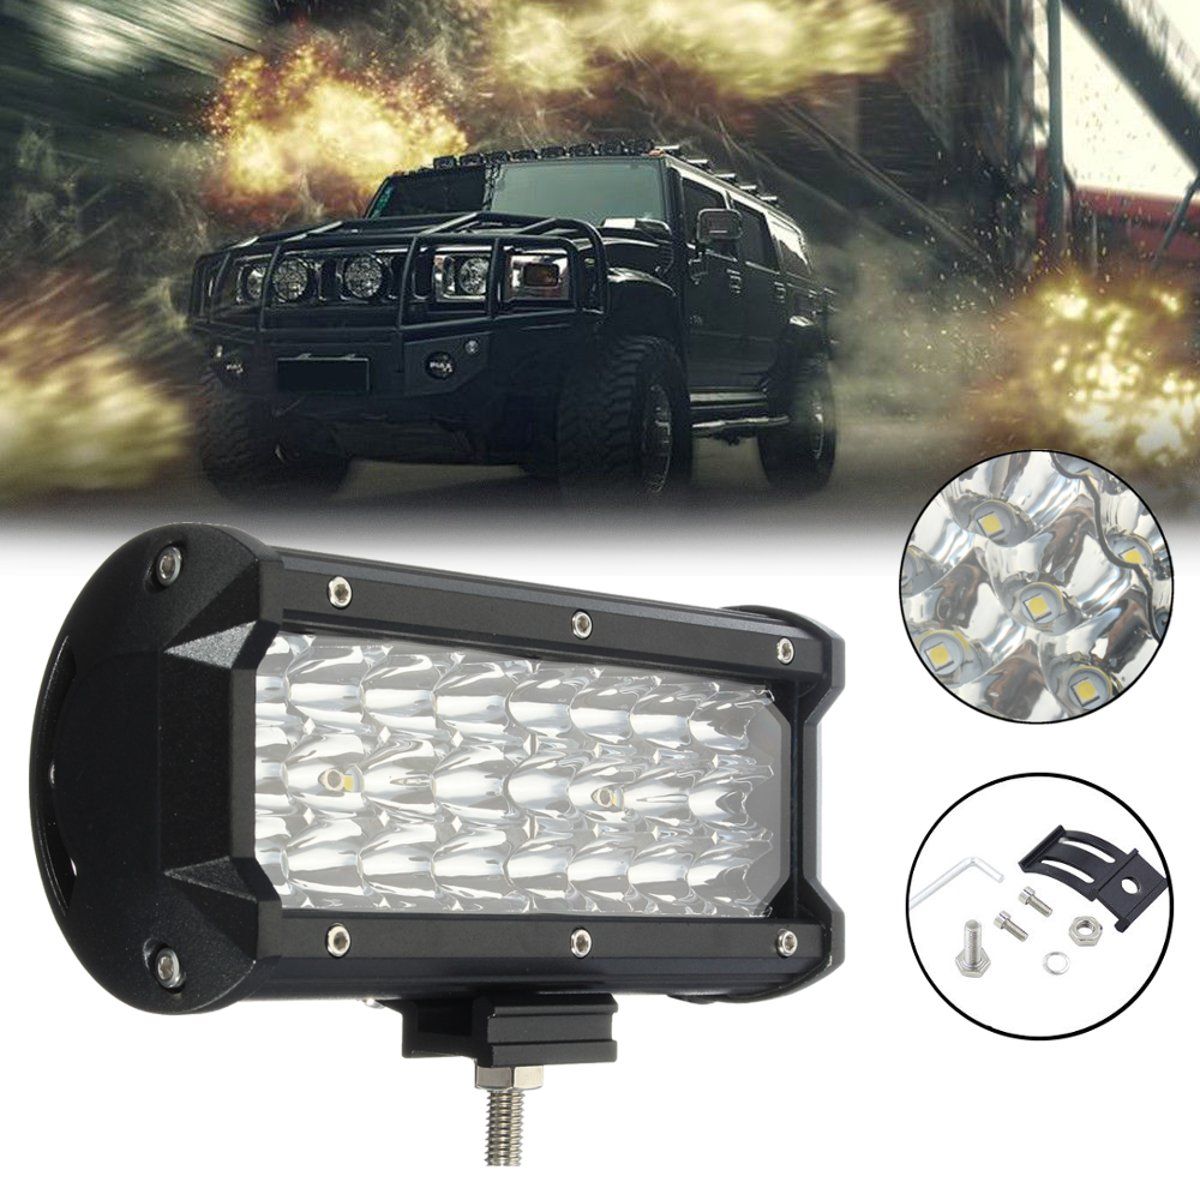 Car-72W-24-Dual-Row-Spot-LED-Light-Bar-for-Off-road-Trucks-Motorcycles-Automobiles-1214774